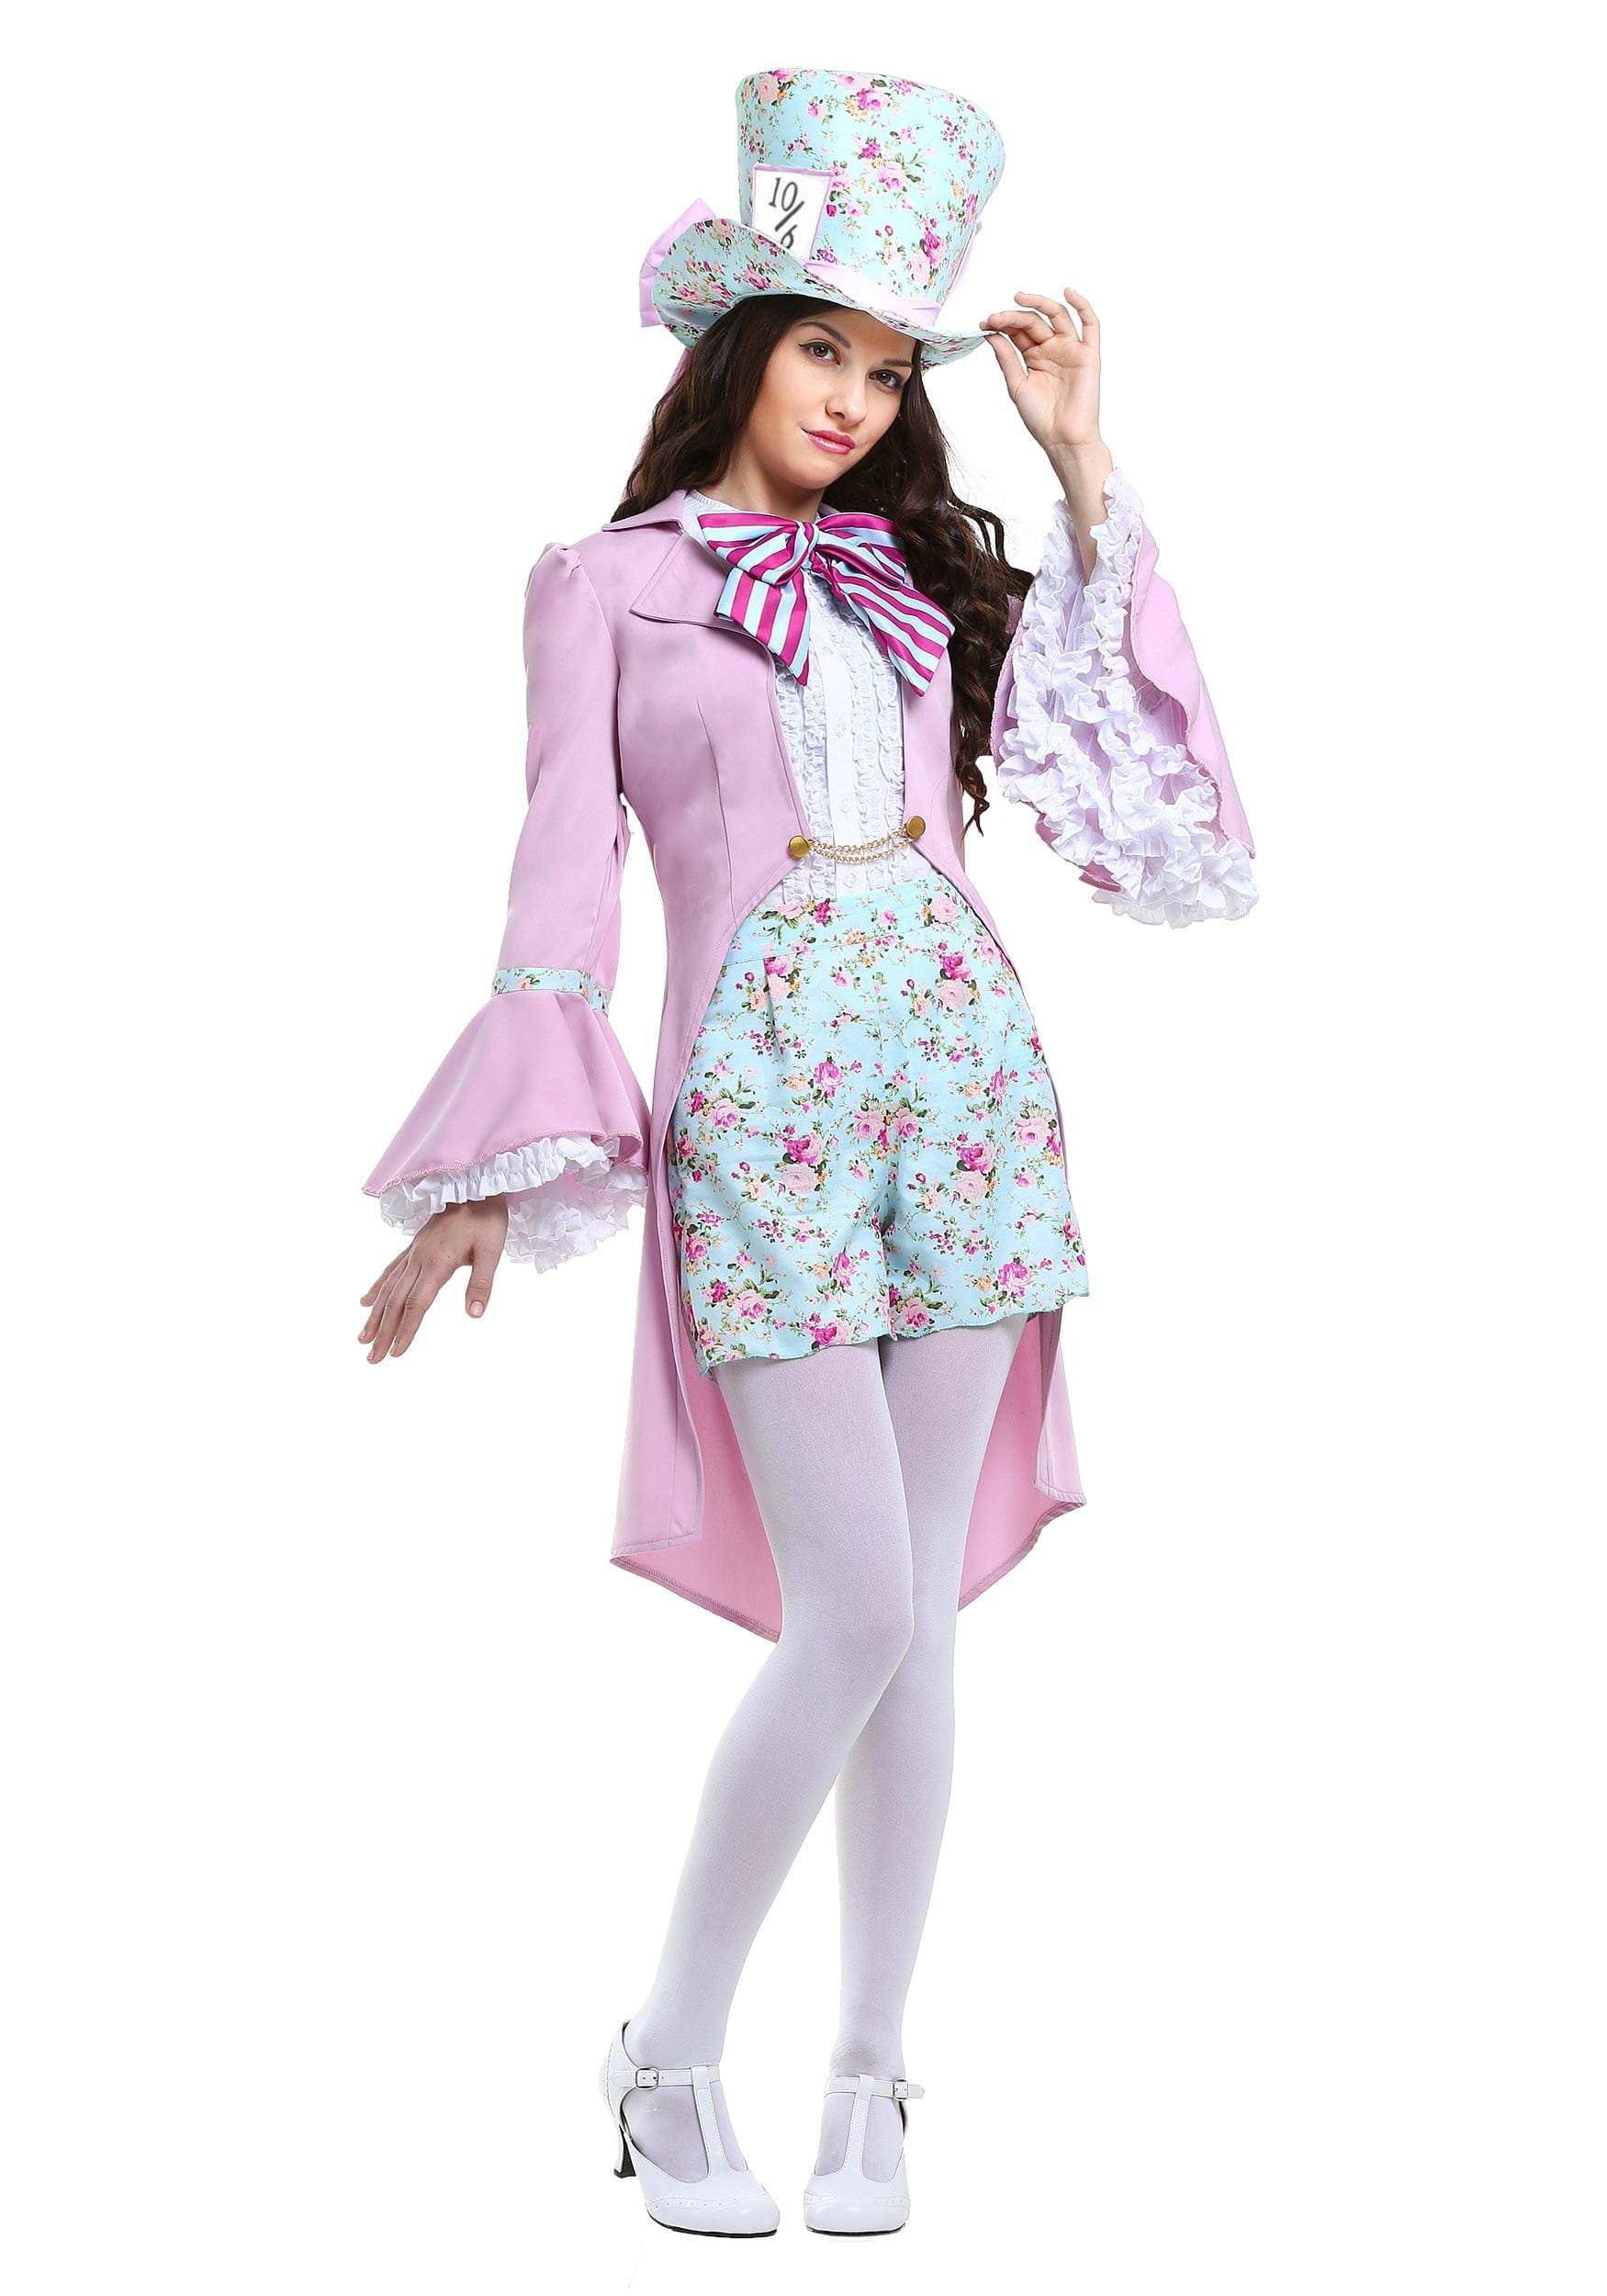 Photos - Fancy Dress Mad Hatter FUN Costumes Pretty   Costume for Women Pink/Blue 